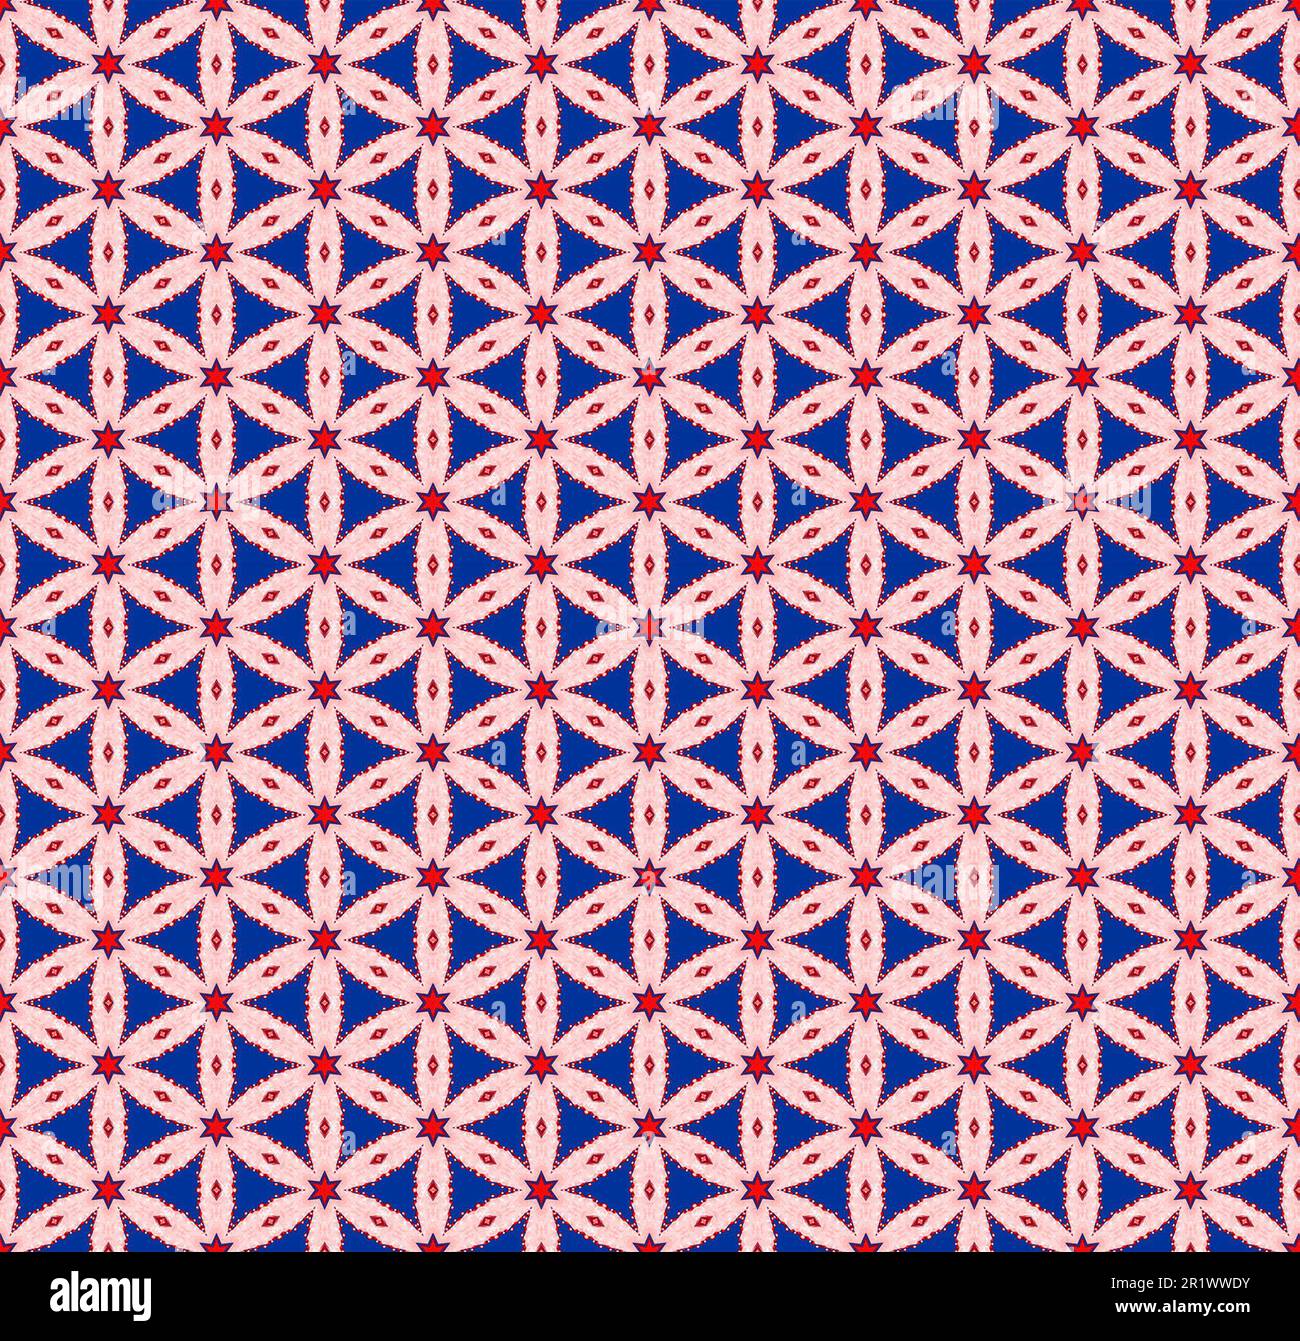 Red white and blue design with star shapes geometric seamless pattern digital art design. Abstract graphic for background wallpaper. Stock Photo